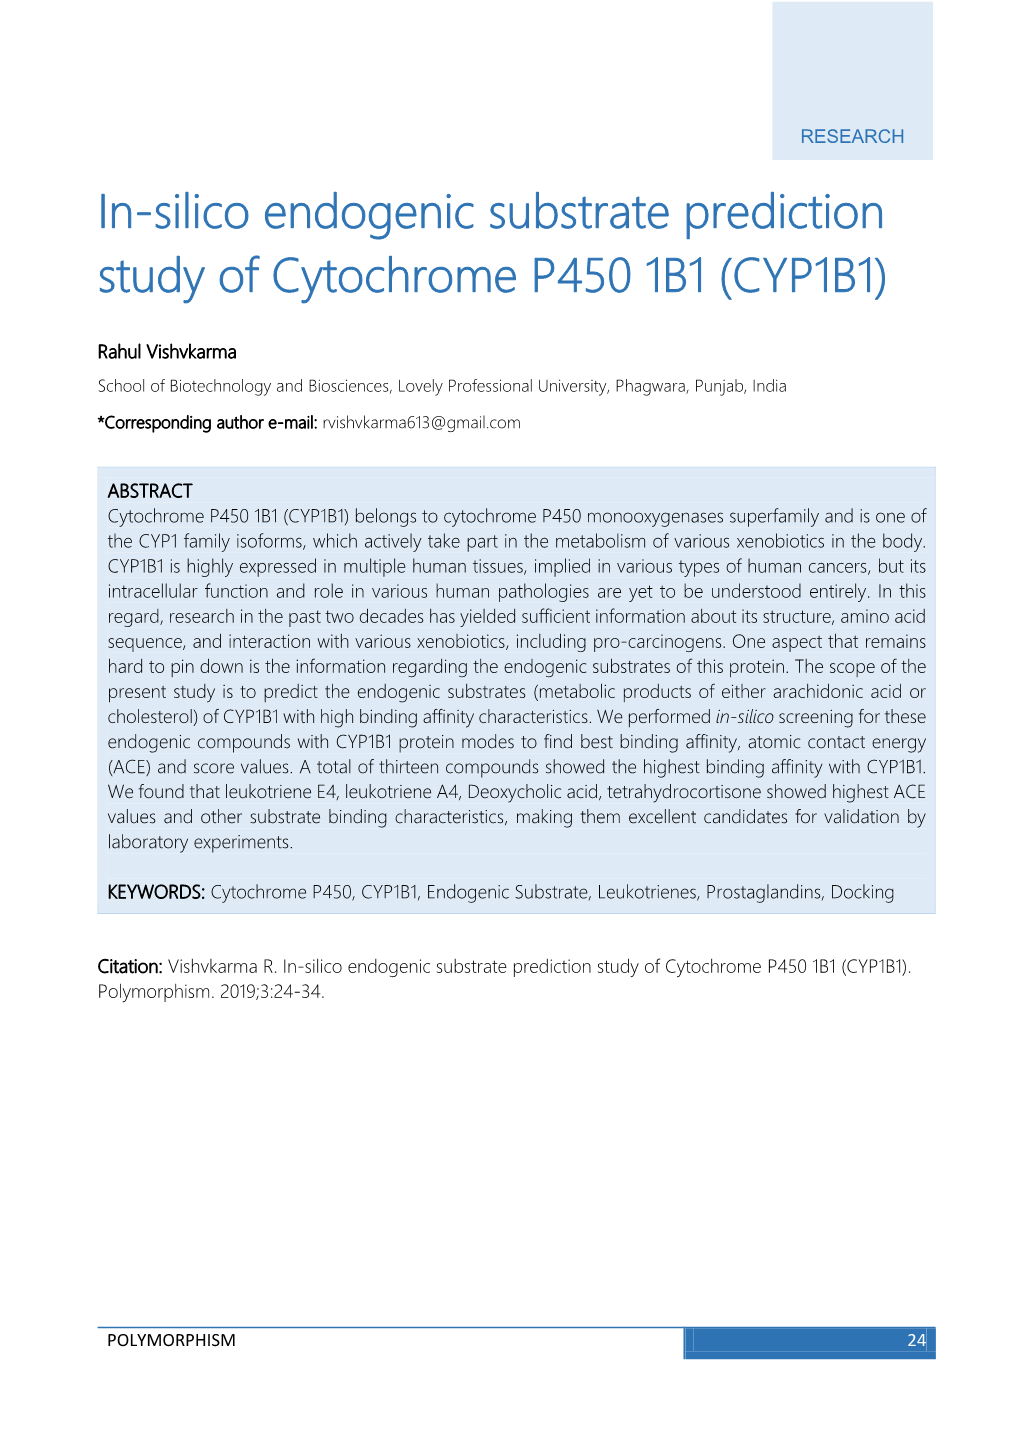 In-Silico Endogenic Substrate Prediction Study of Cytochrome P450 1B1 (CYP1B1)